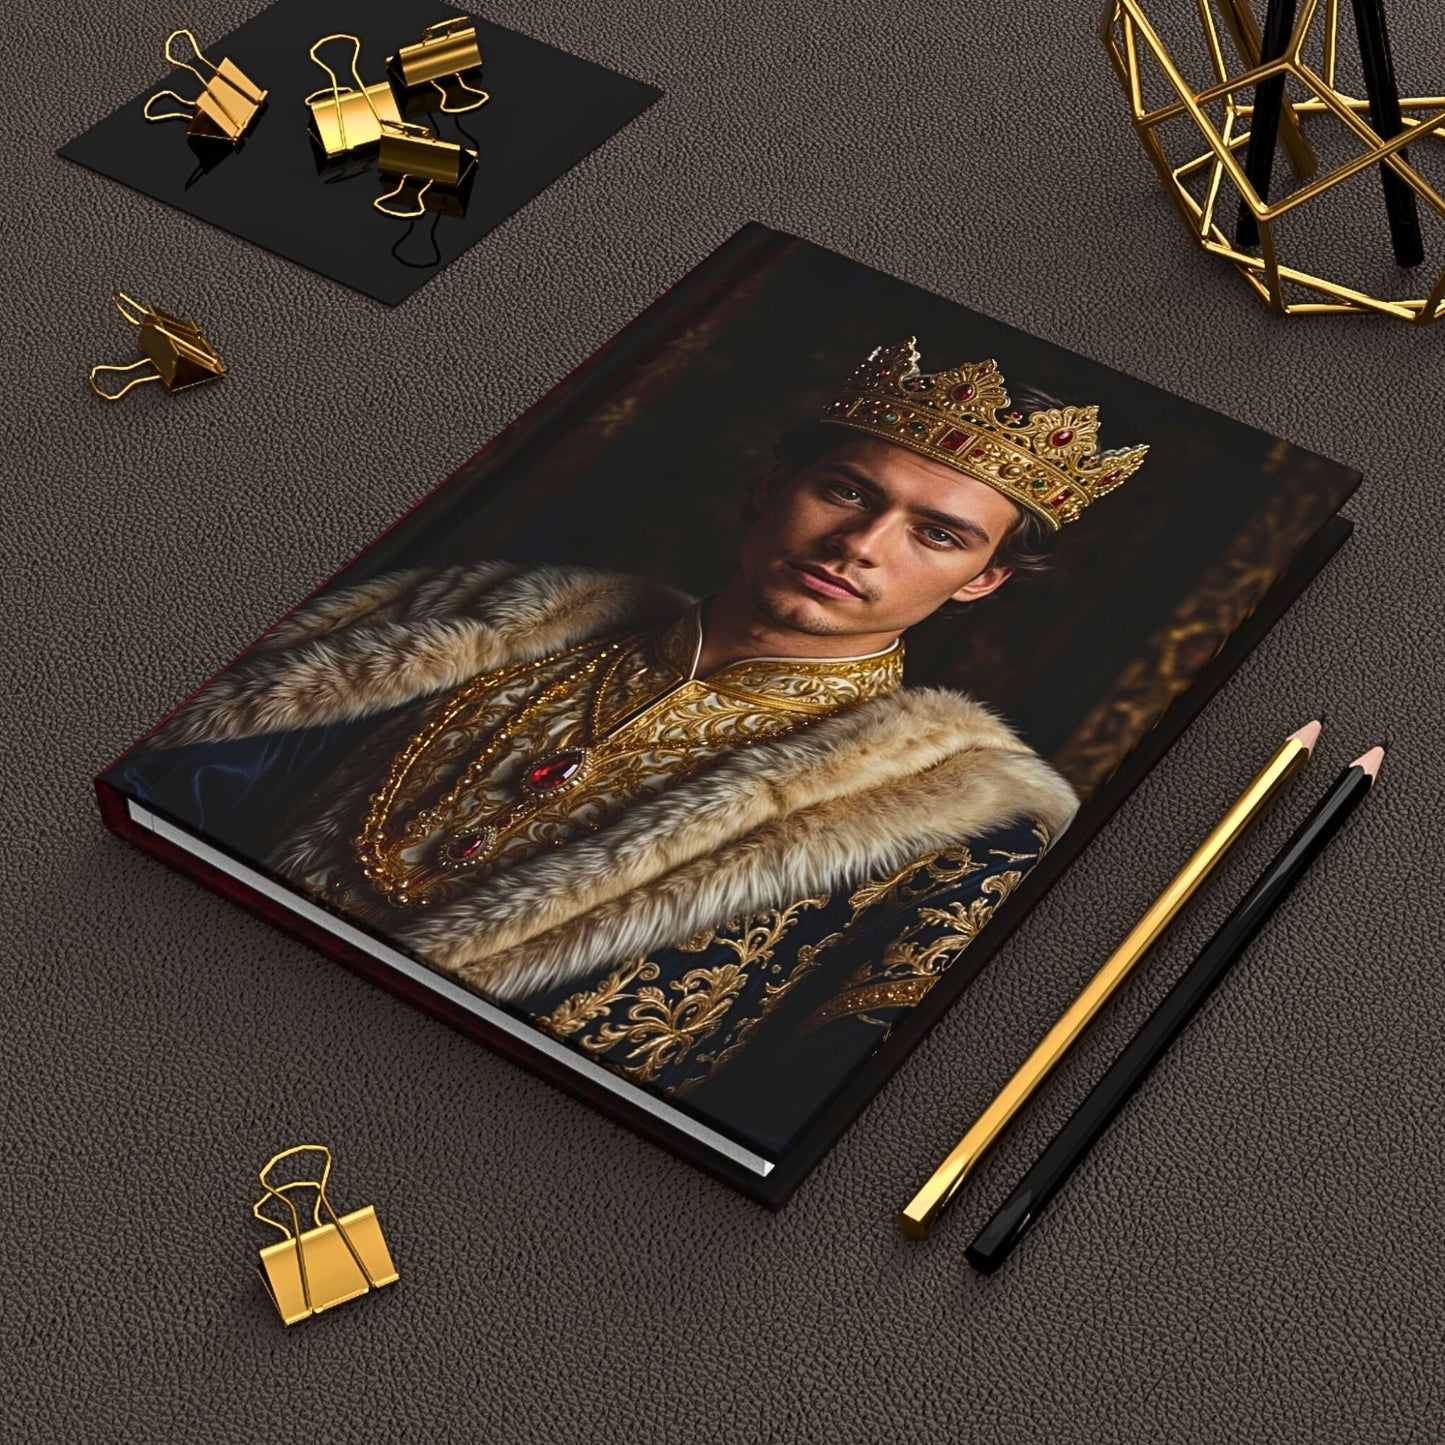 Custom Journal from Photo, Personalized King Journal - The Ultimate Keepsake Memory Journal for Him. A15.1